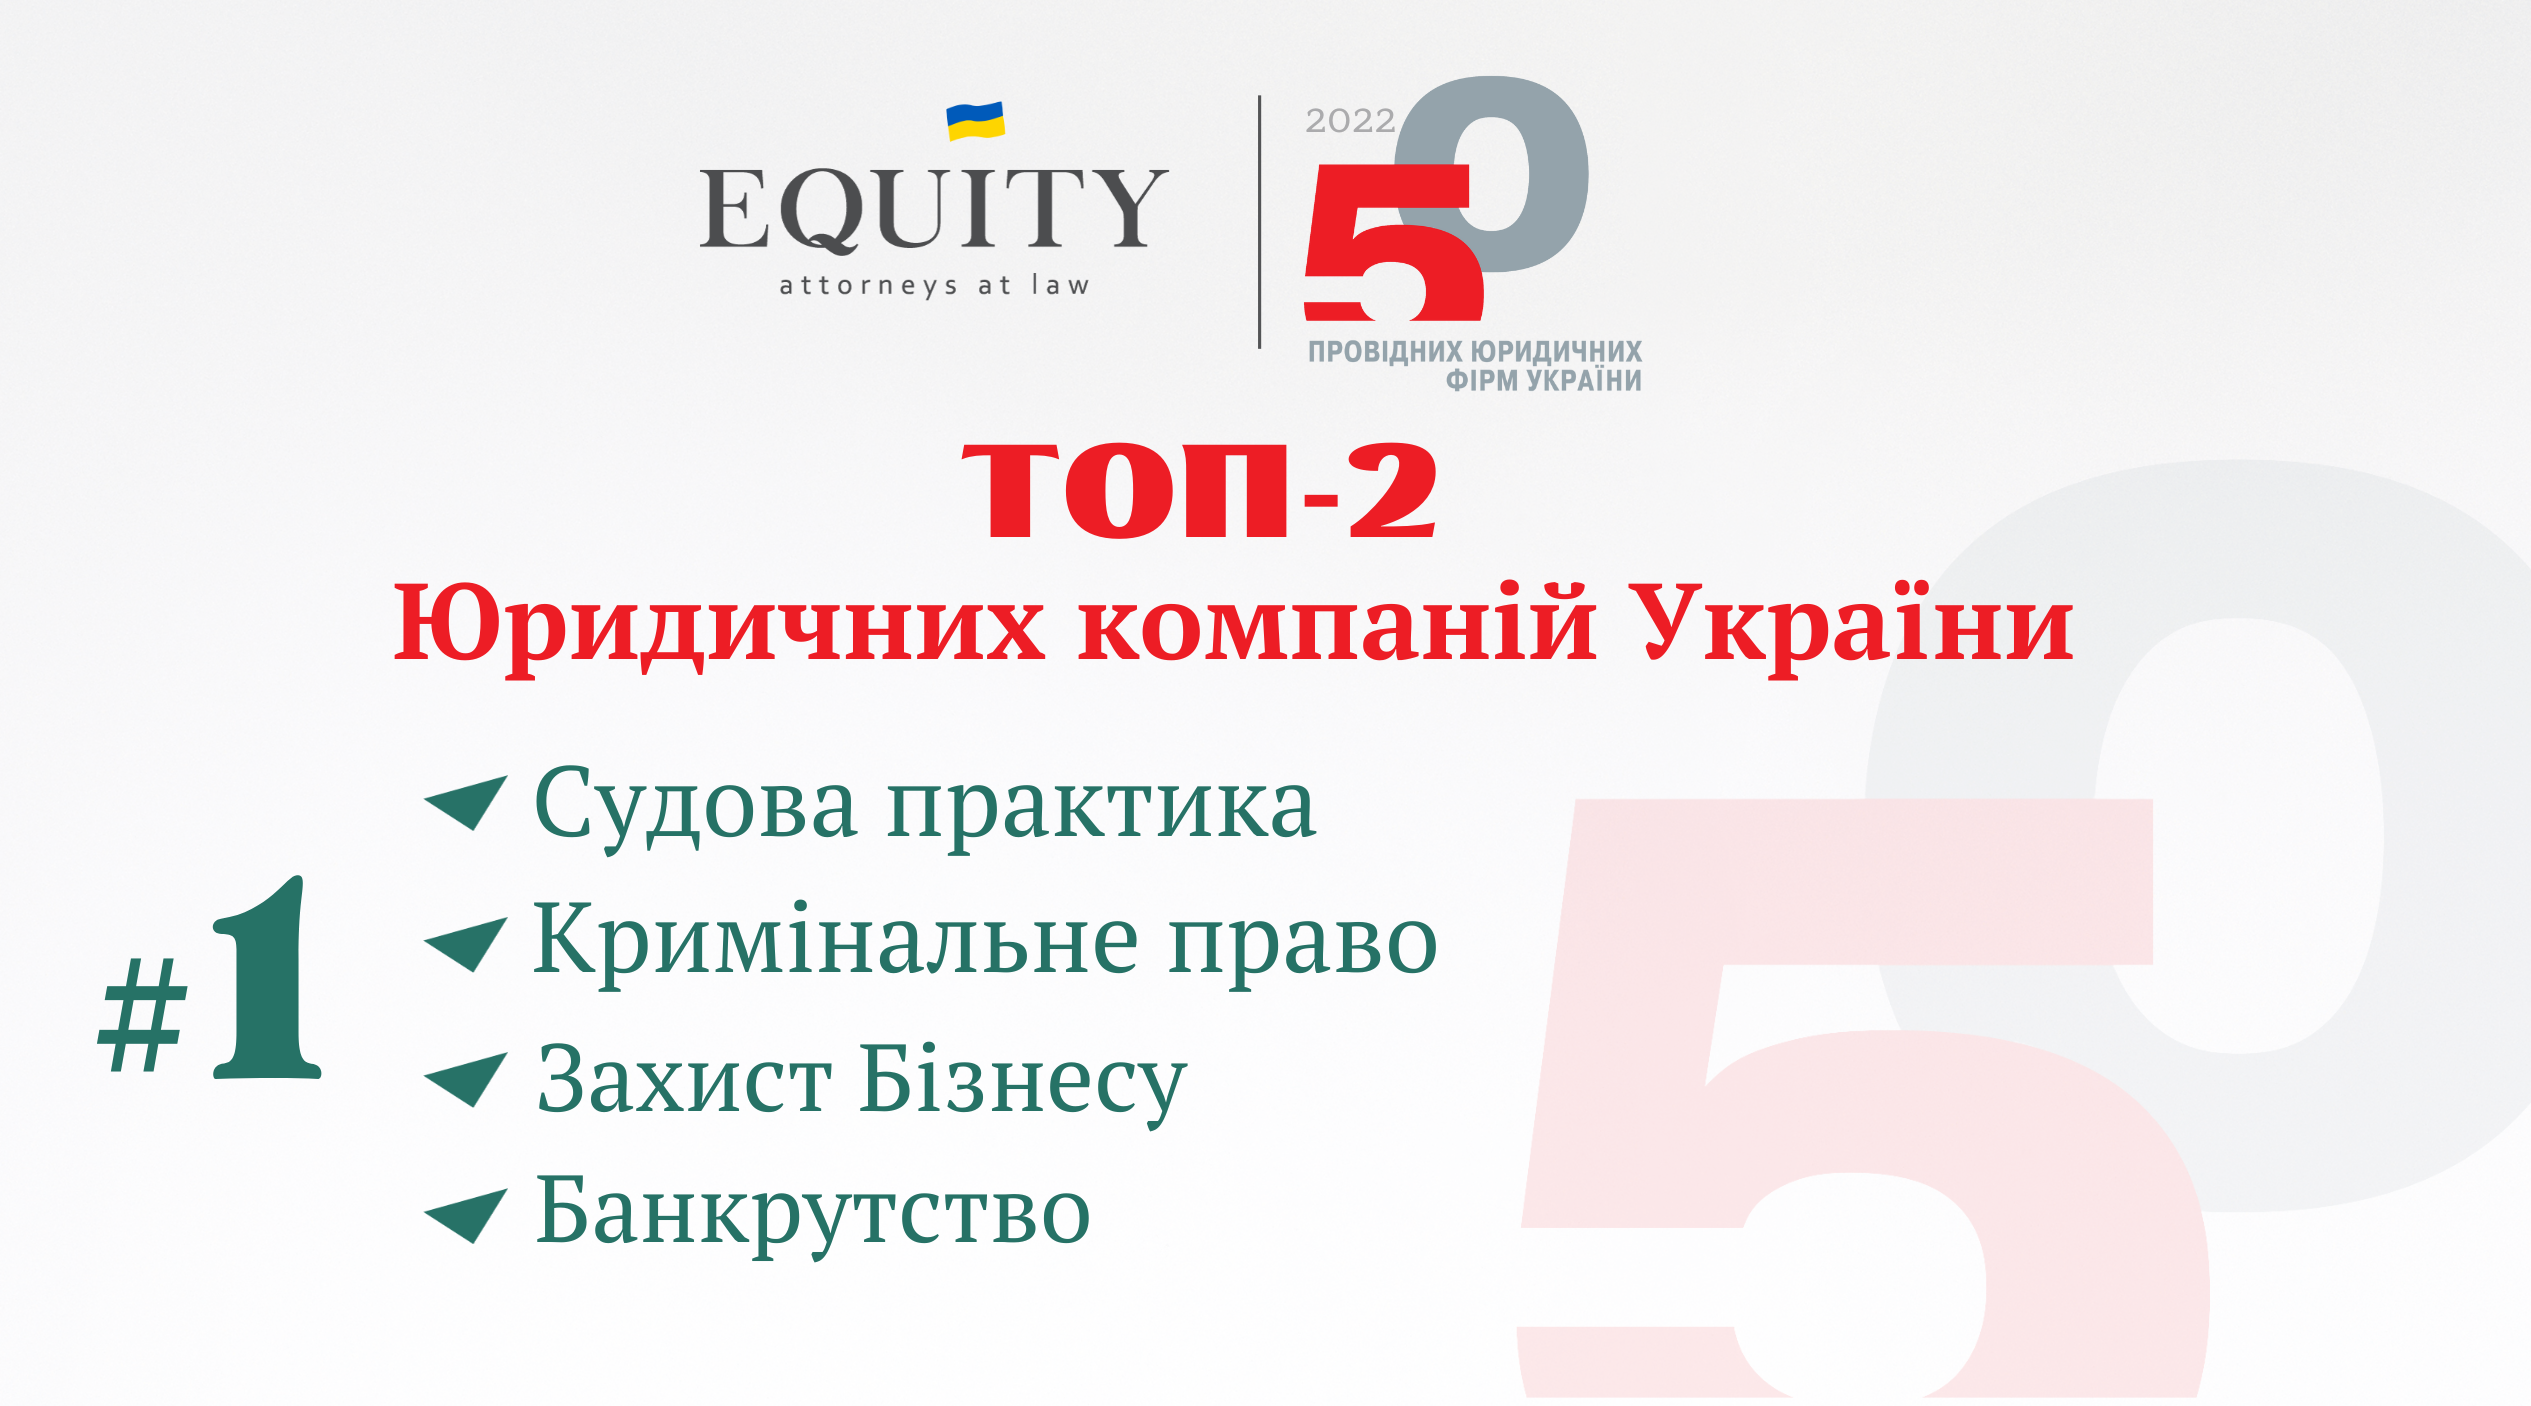 EQUITY Law Firm is the TOP-2 leading law firms of Ukraine!